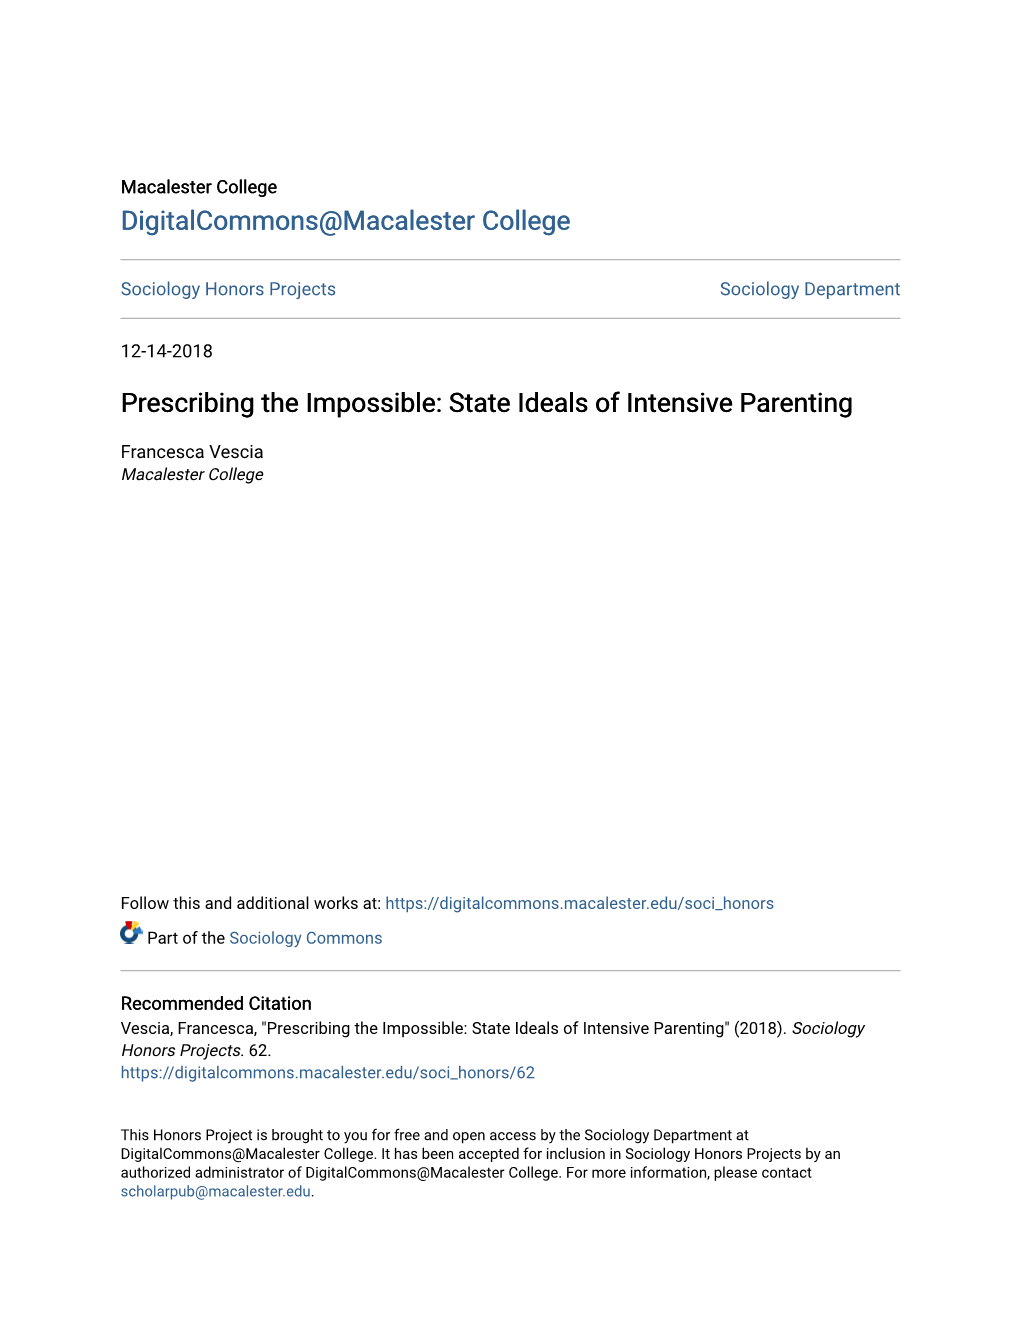 Prescribing the Impossible: State Ideals of Intensive Parenting